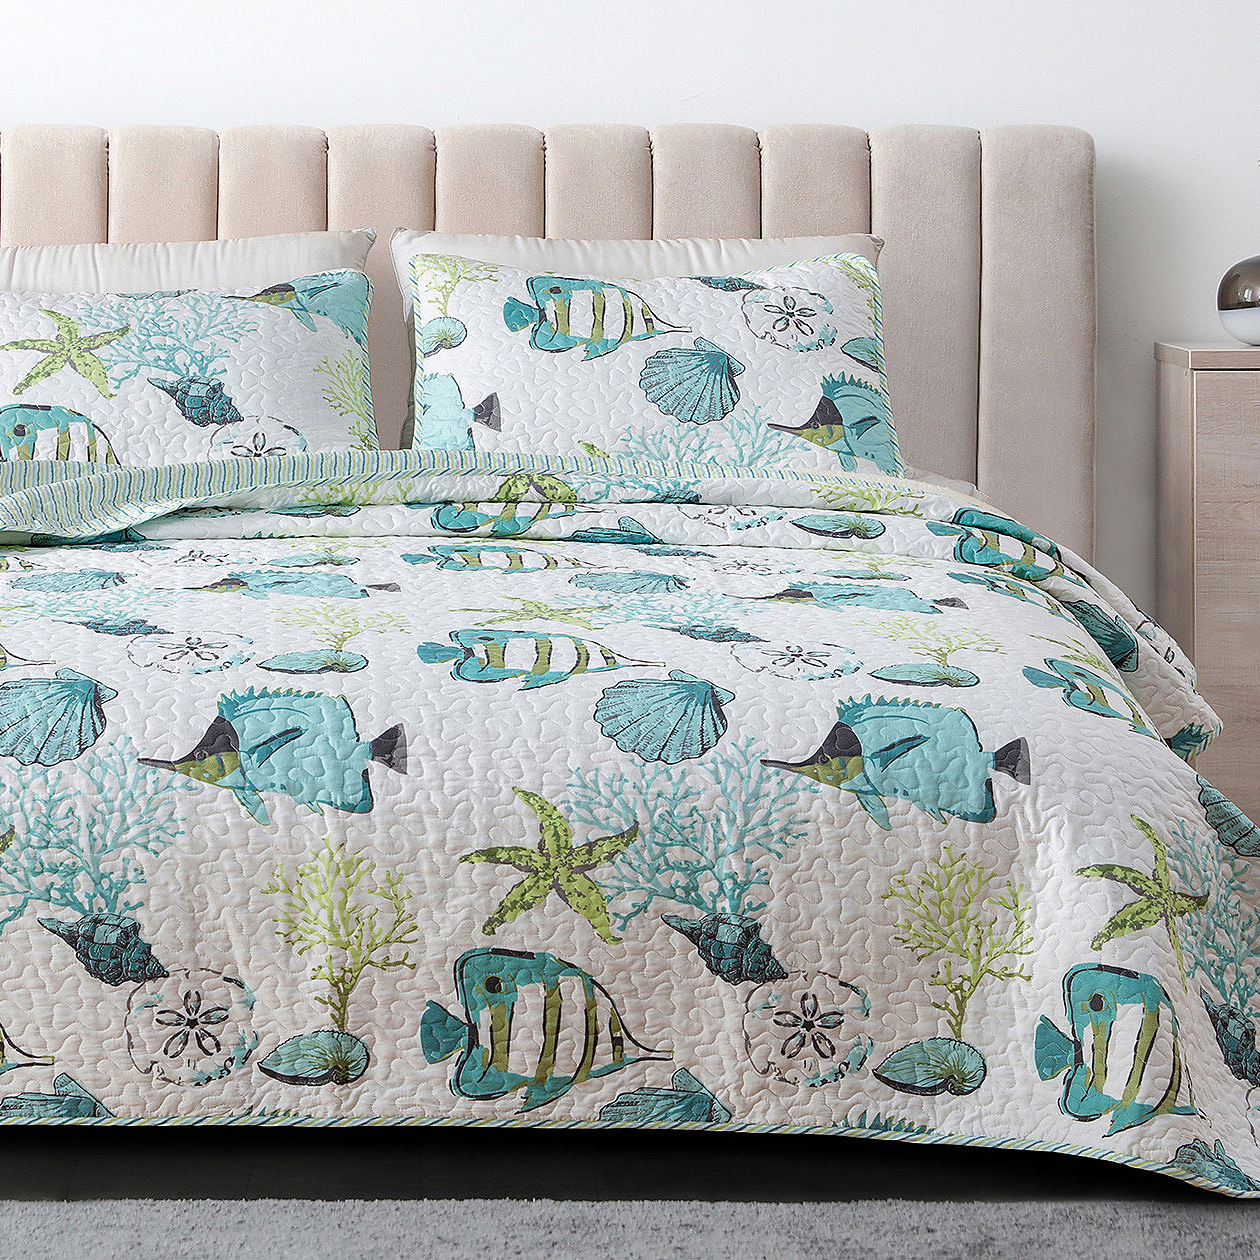 A quilt and pillow shams with a marine life pattern, including various fish, coral, and seaweed designs in shades of blue and green.